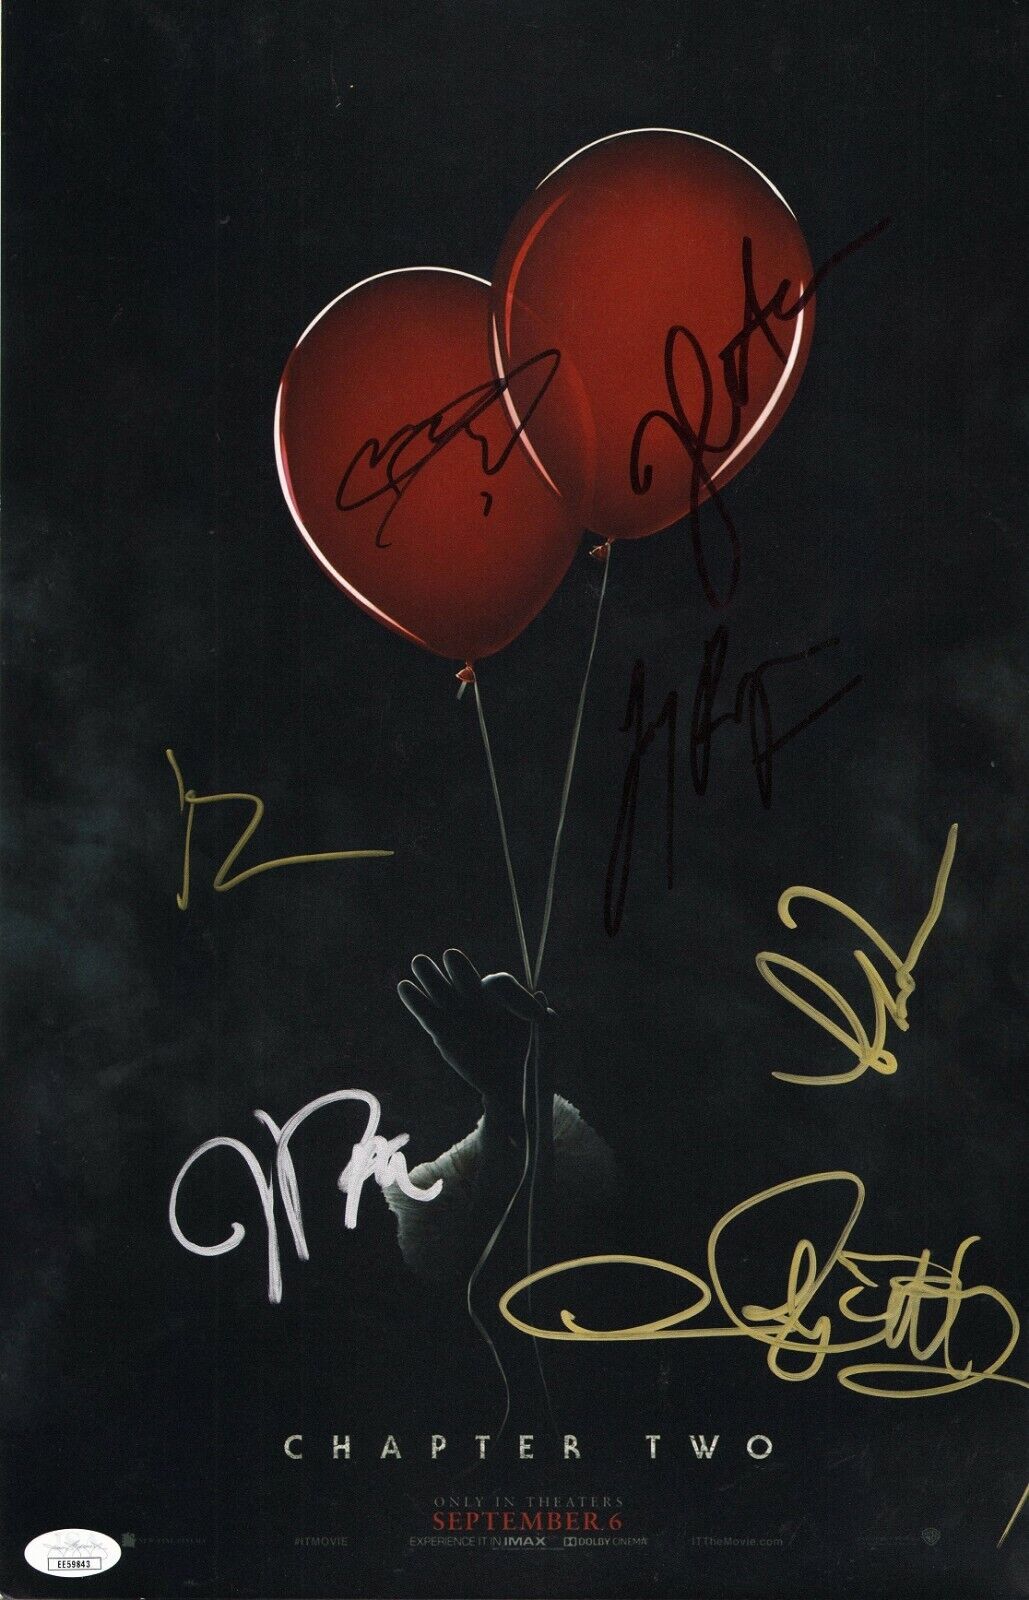 IT CHAPTER 2 Cast x7 Authentic Hand-Signed JAMES McAVOY 11x17 Photo Poster painting (JSA COA) B